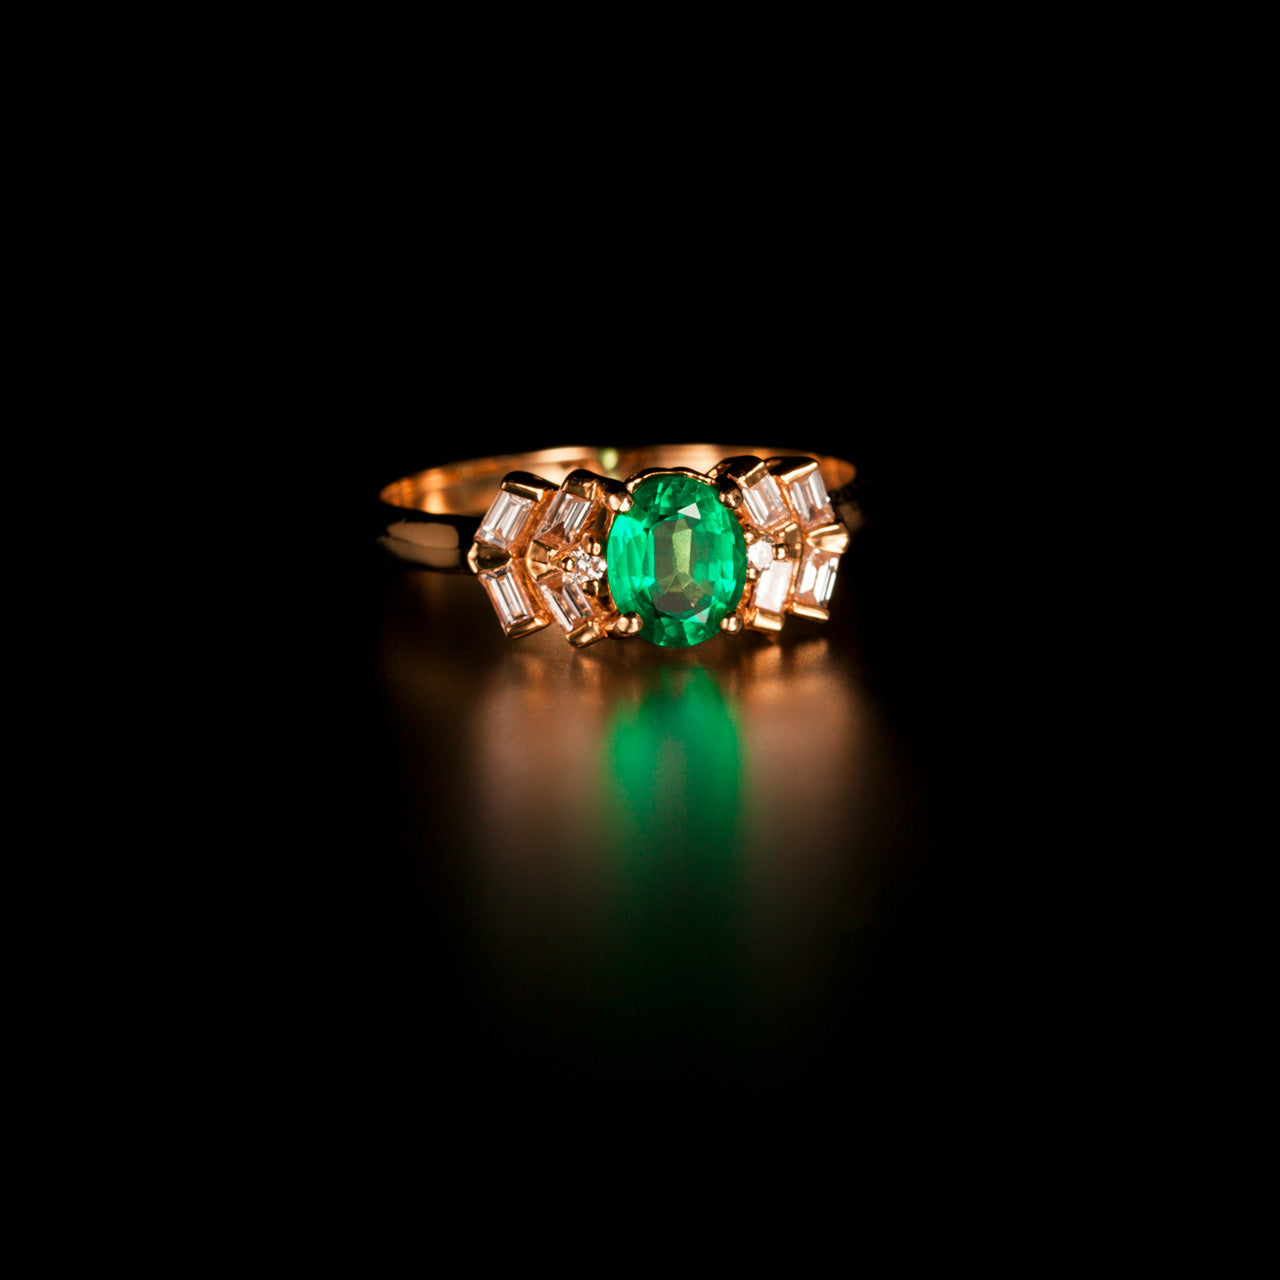 18k yellow gold ring featuring a 0.63ct emerald and accent diamonds